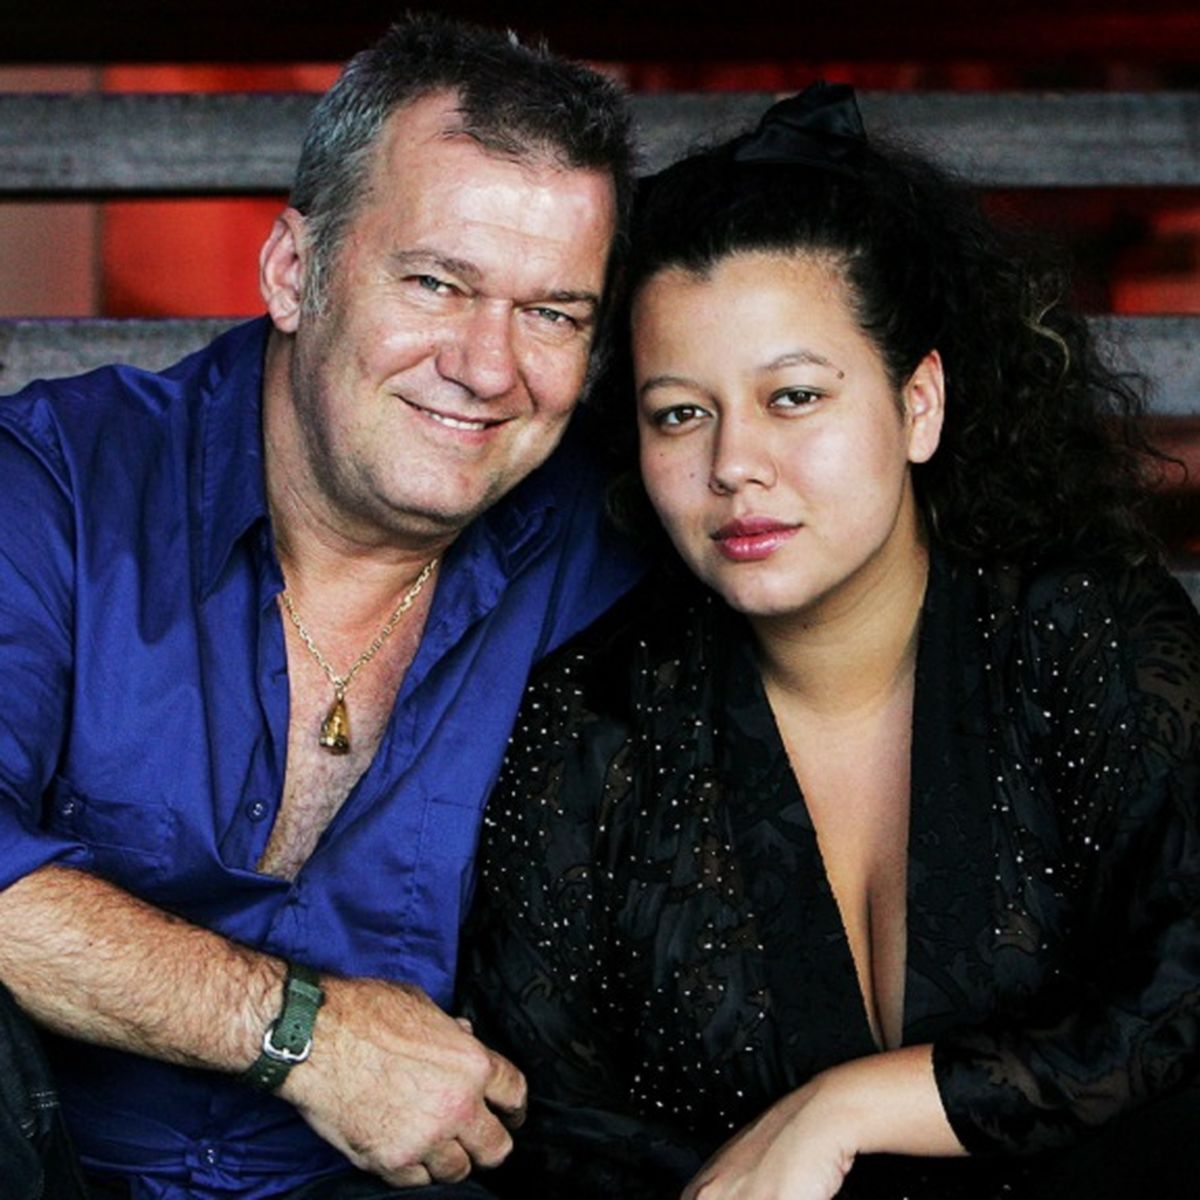 Mahalia Barnes On How She Learned The Truth About Father Jimmy Barnes Childhood Struggles 9honey